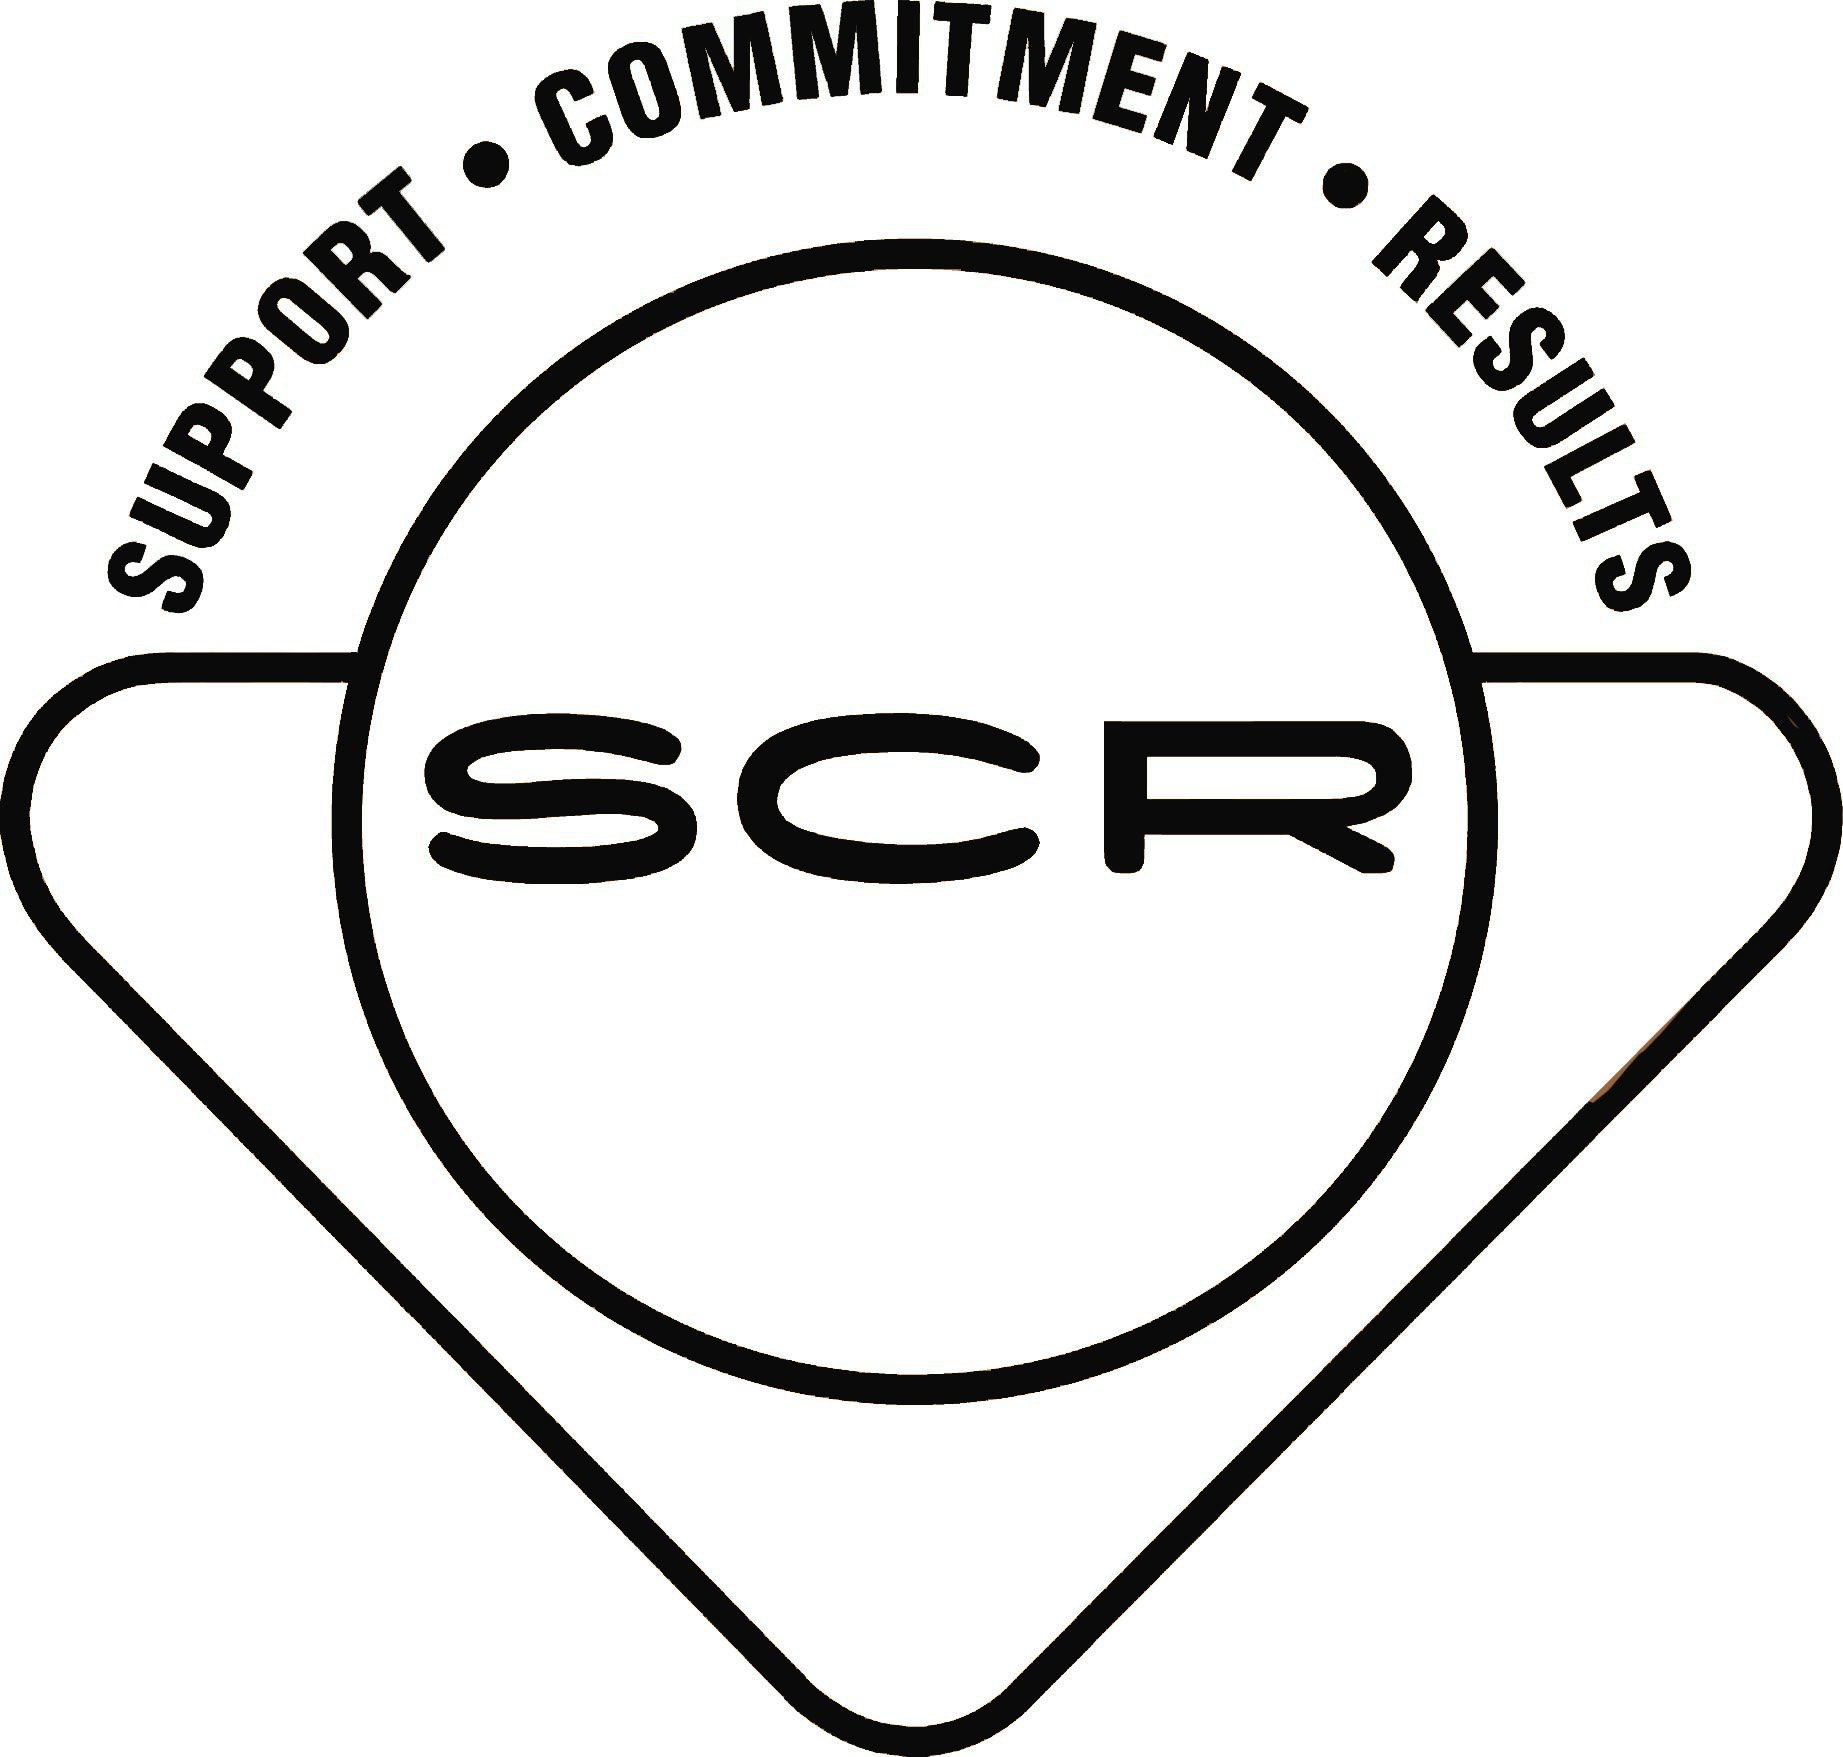  SCR SUPPORT Â· COMMITMENT Â· RESULTS